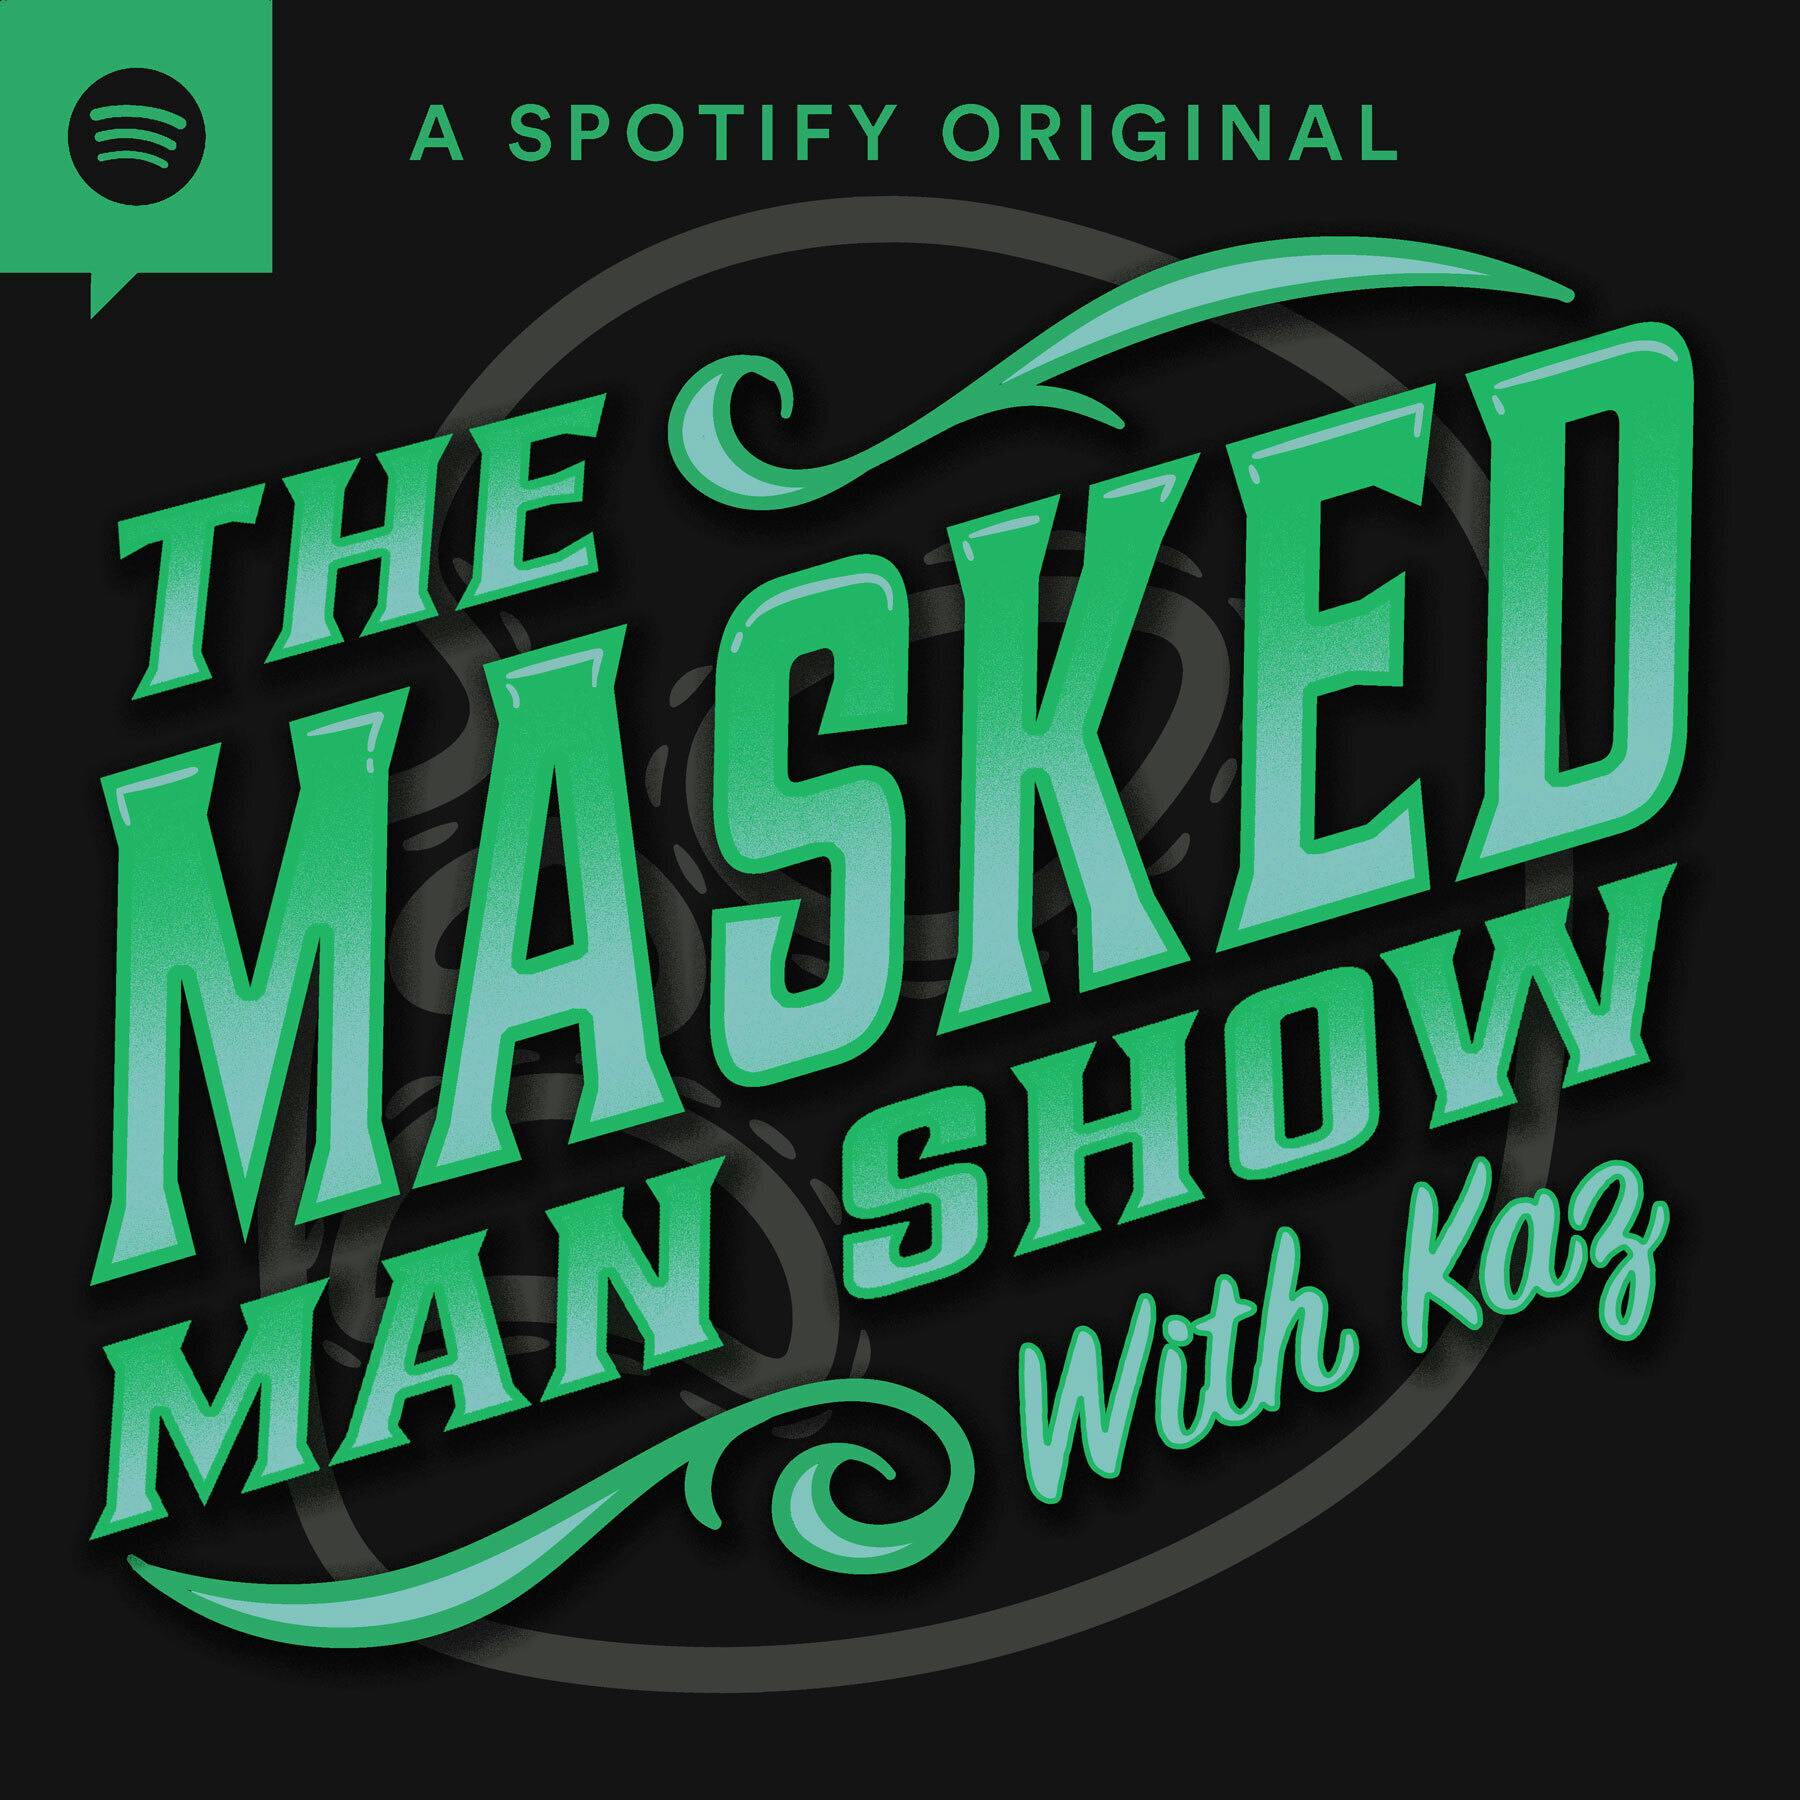 WWE Crown Jewel Preview | The Masked Man Show